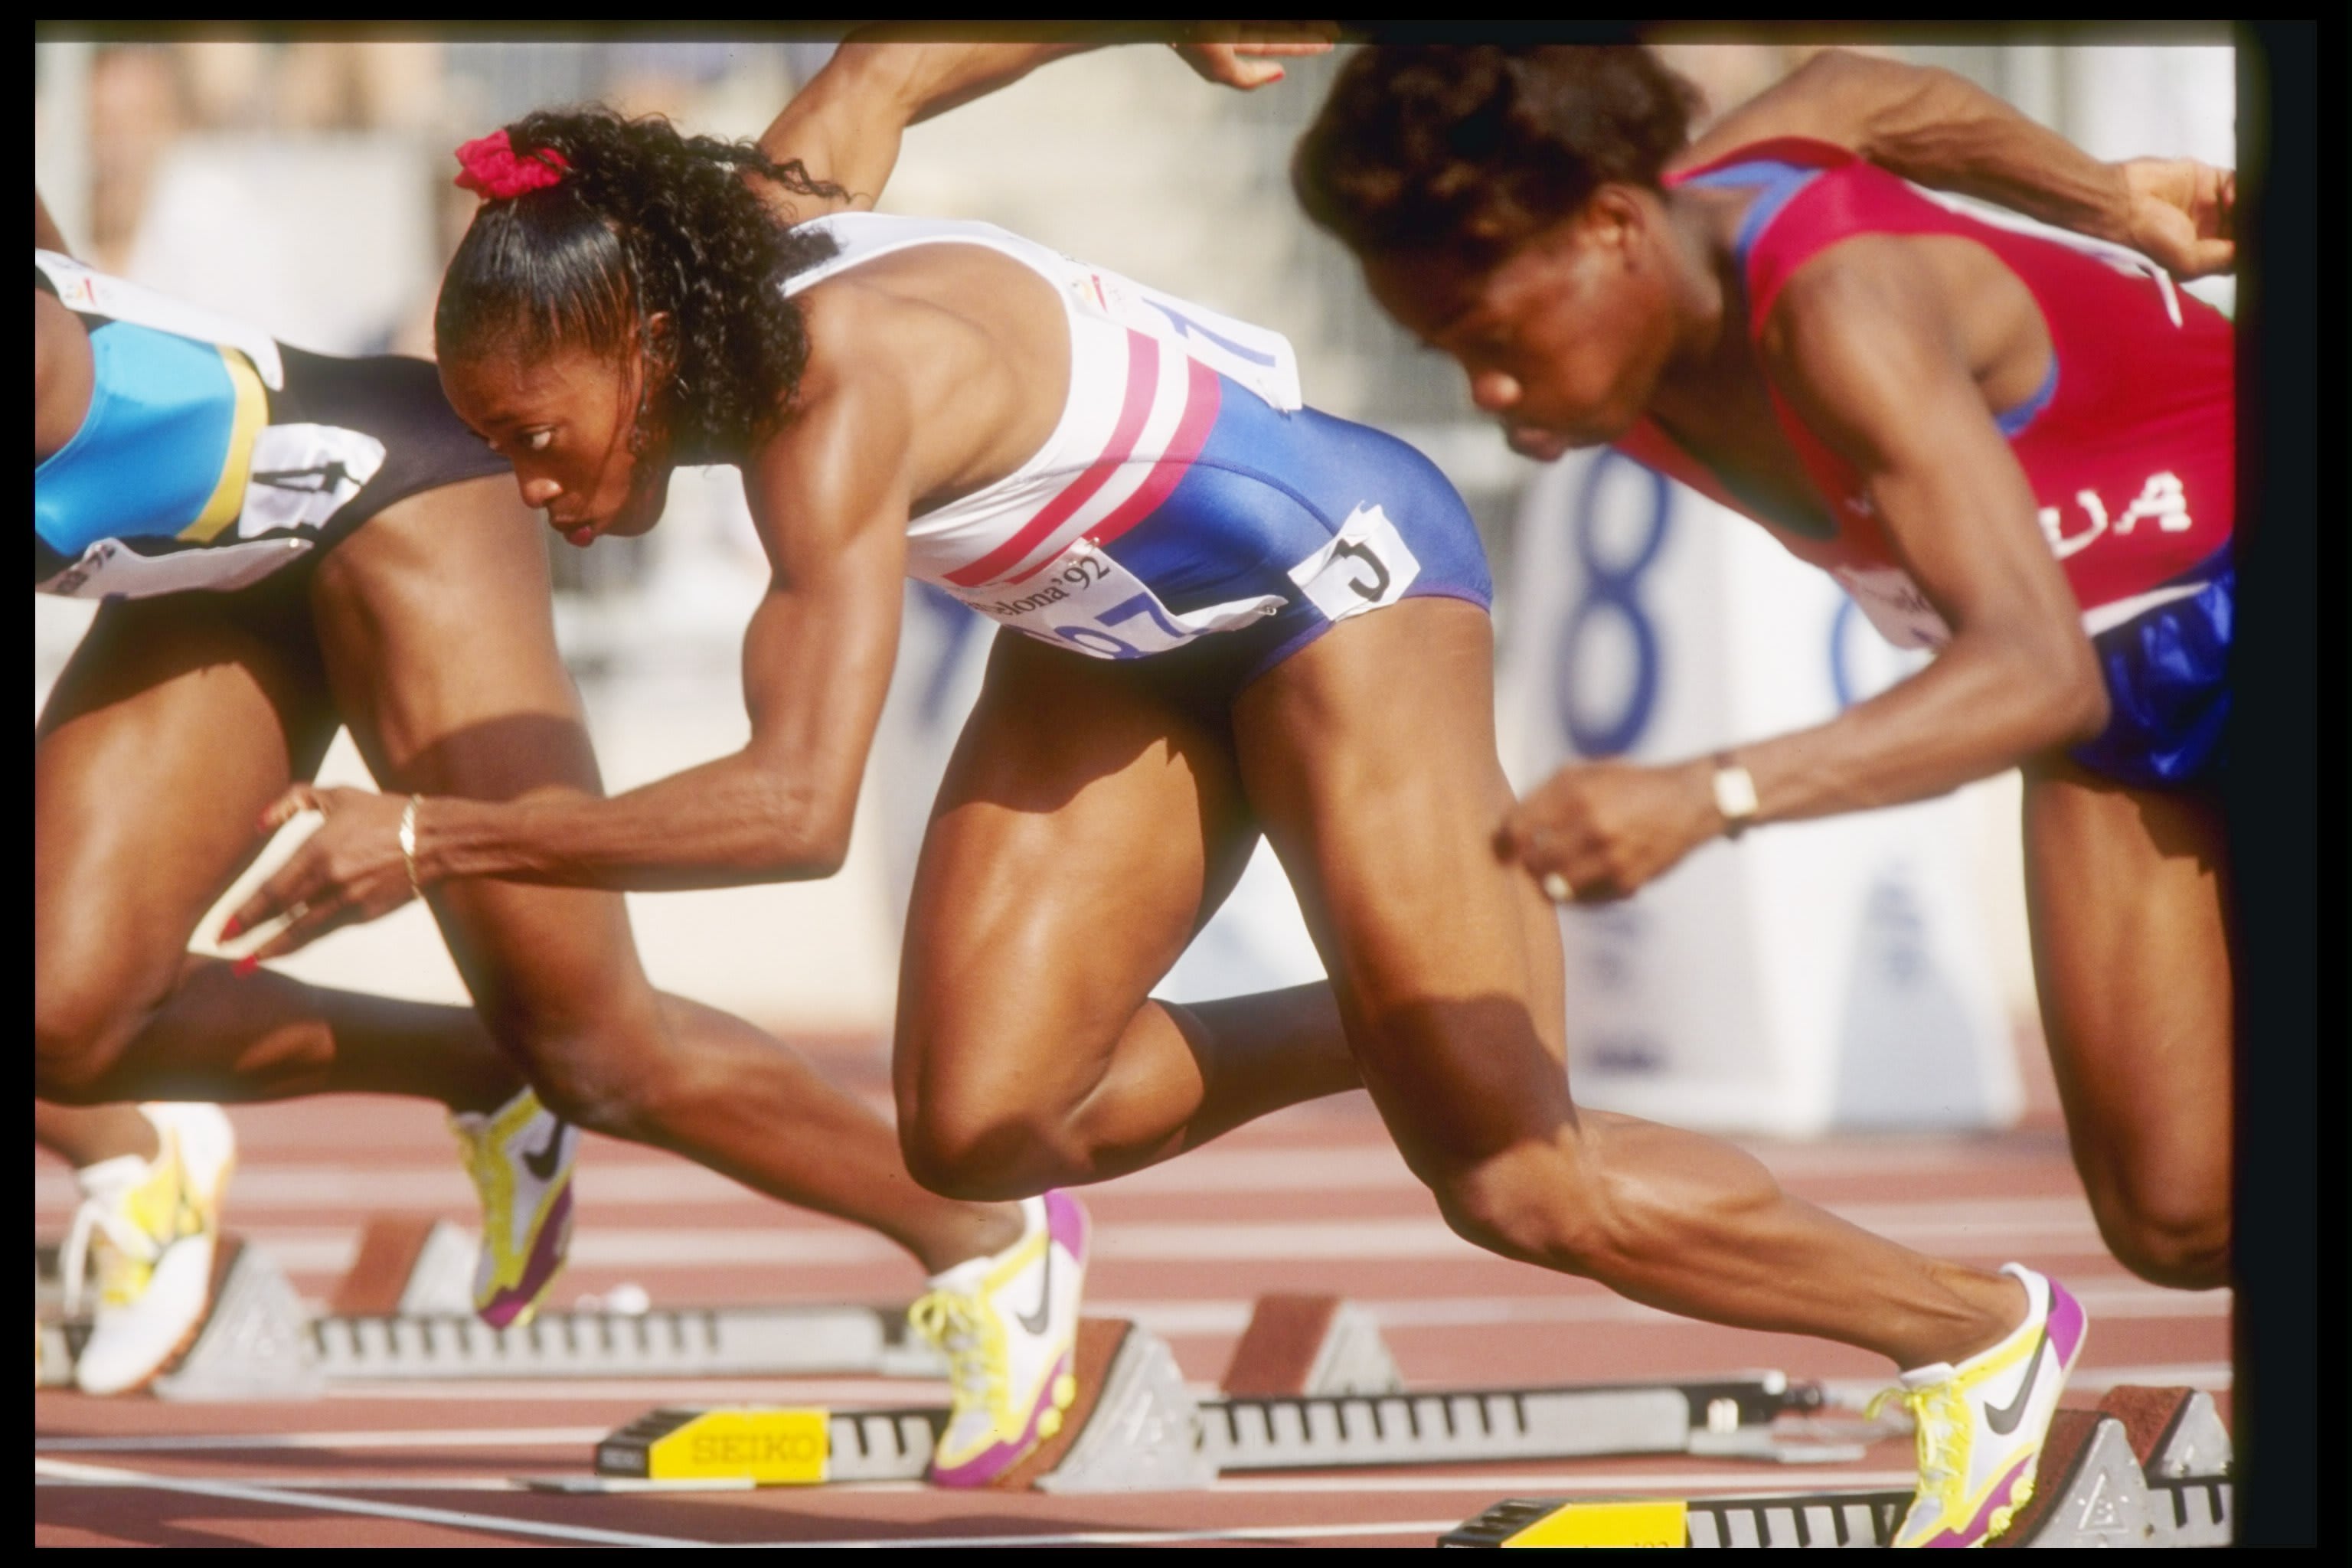 Great Olympic moments: Barcelona 1992 Women's 100m Final